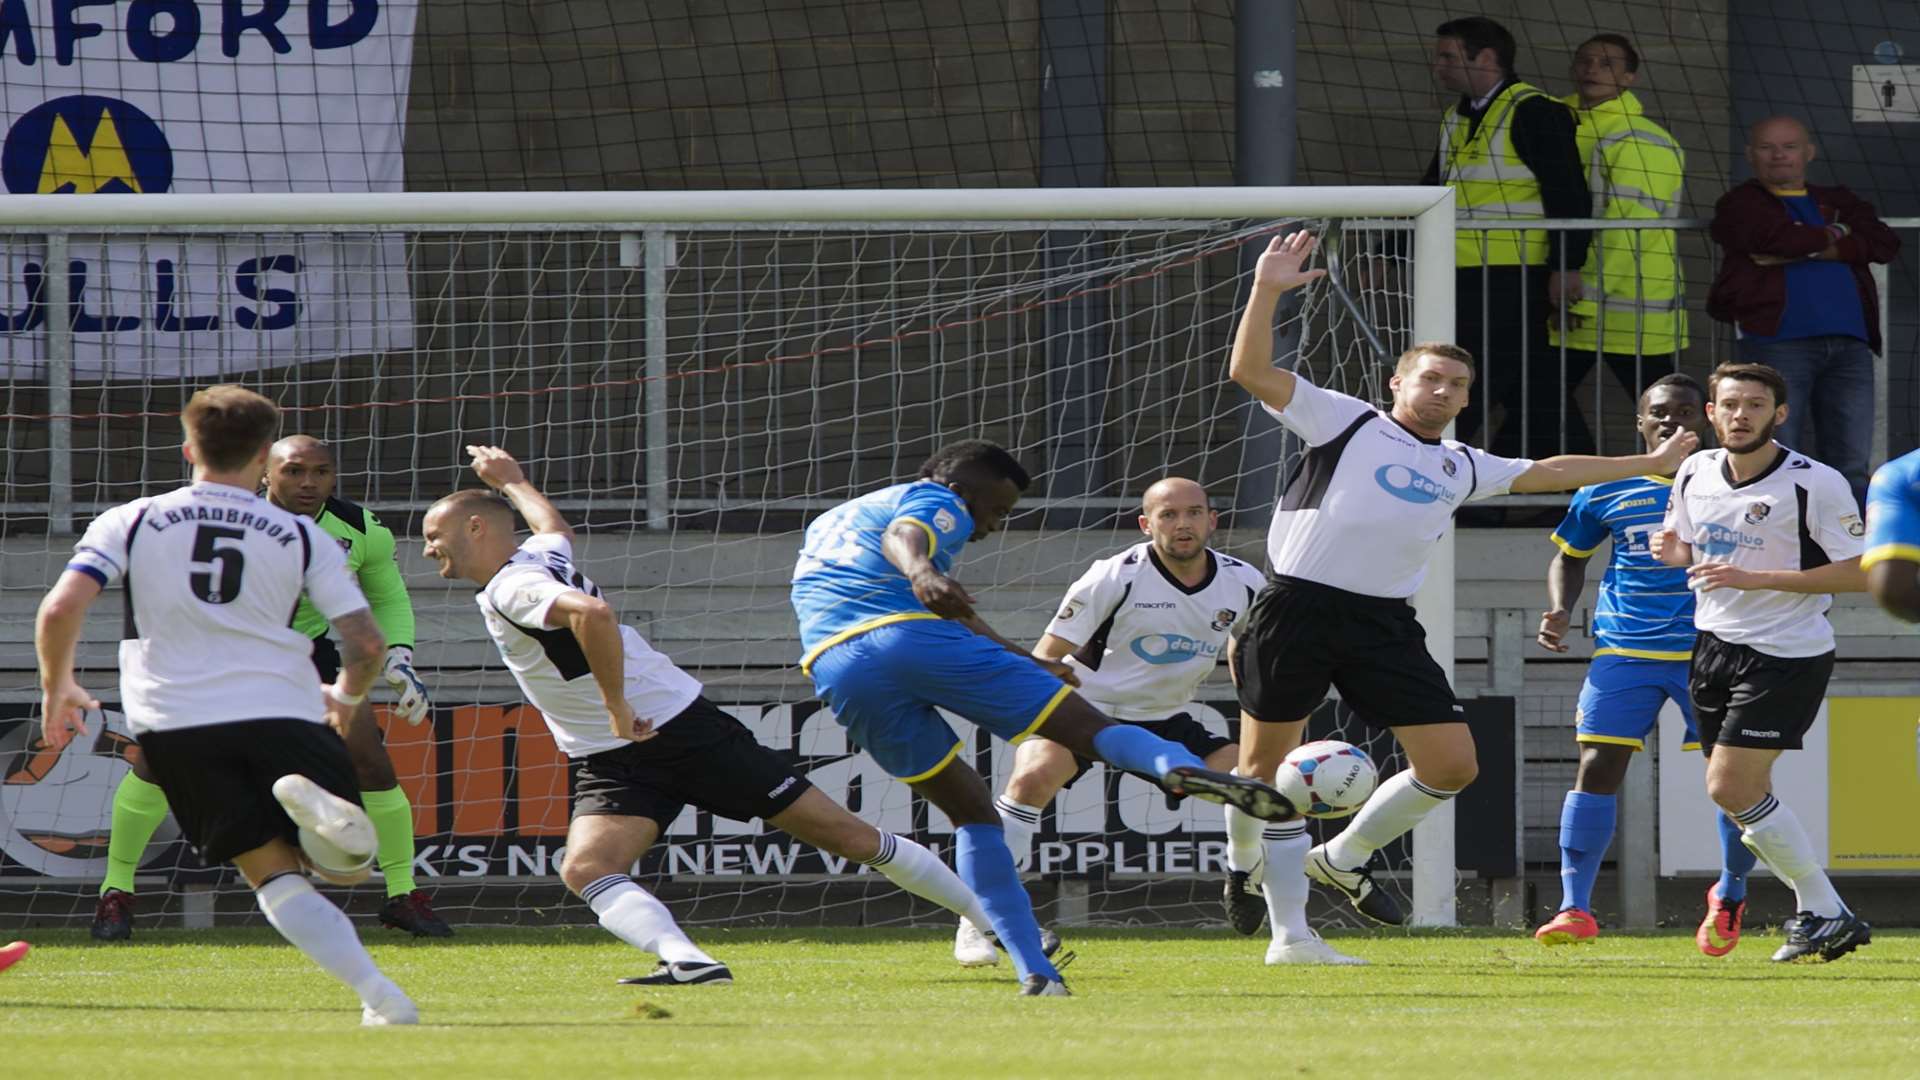 Dartford do their best to block this strike from Torquay's Duane Ofori-Acheampong Picture: Andy Payton